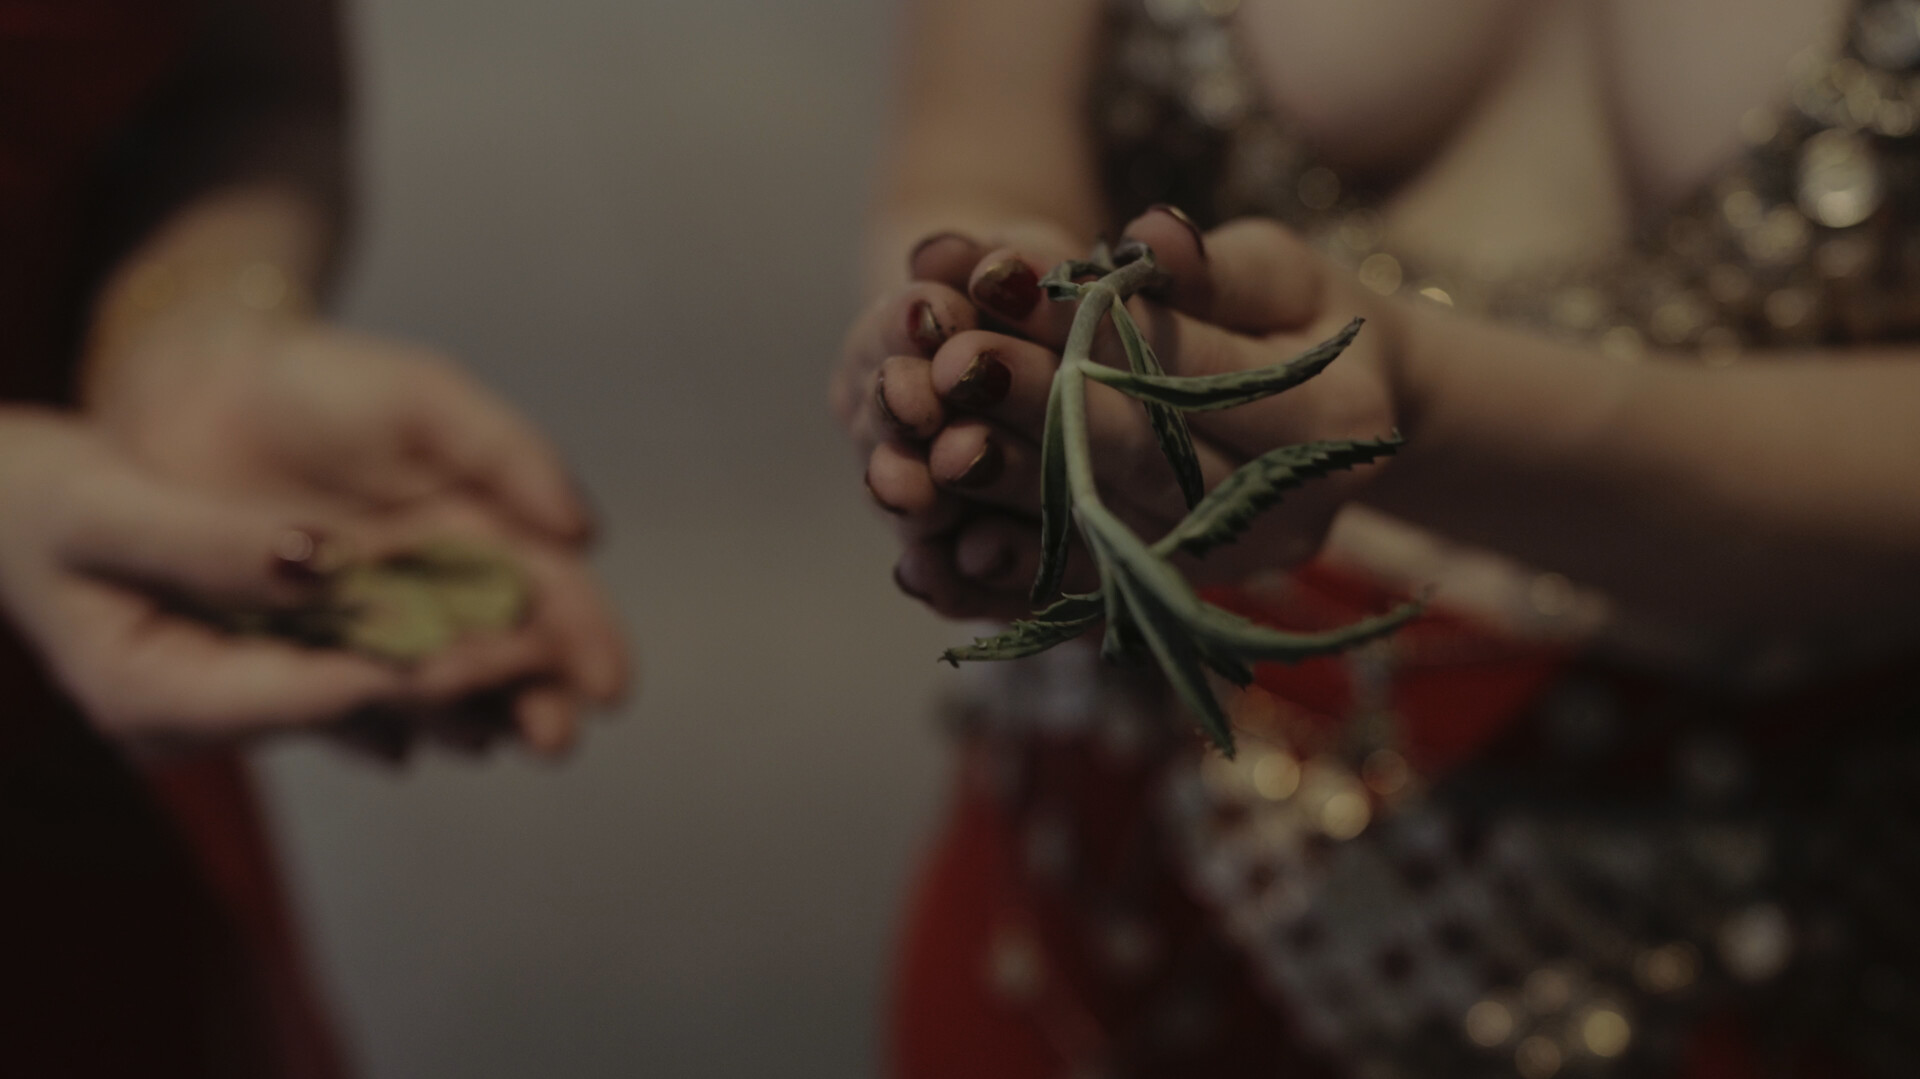 Women dancers with close up on their hands holding "Mother of Thousands" plants